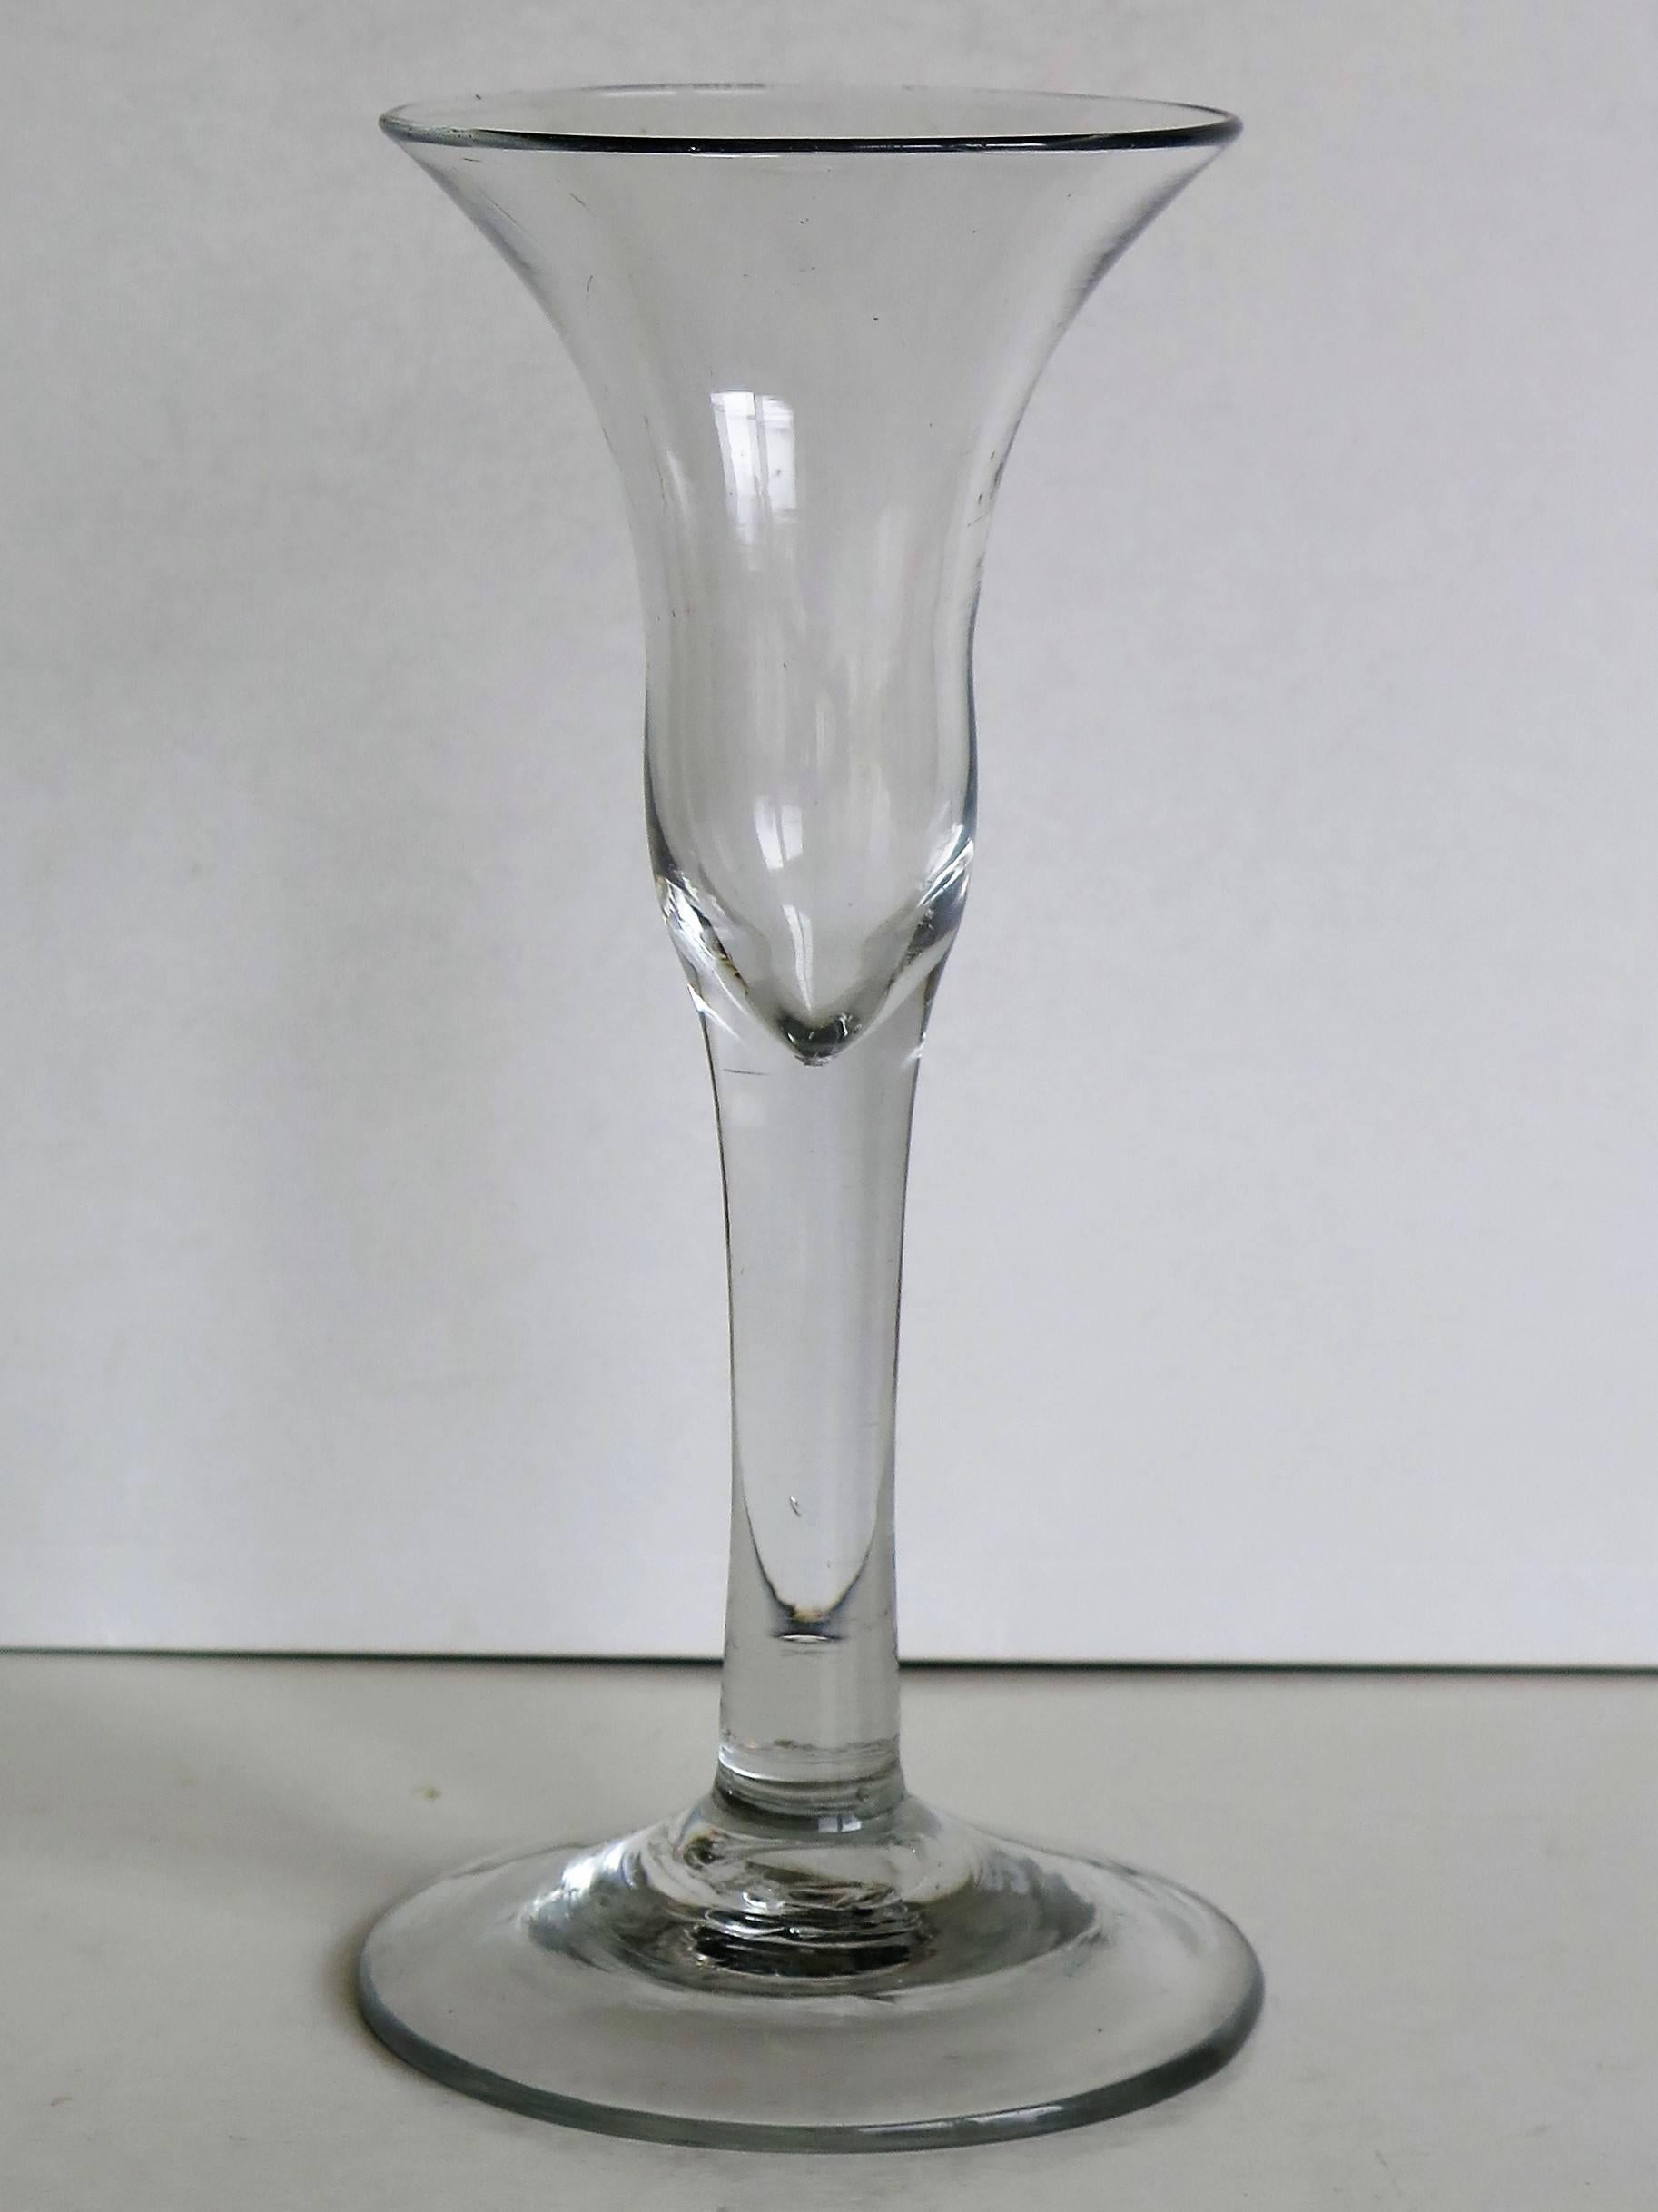 This is a very good, tall, English, mid-Georgian, handblown, wine drinking glass, dating to the George II period of the mid-18th century, circa 1740.

These glasses are very collectable.

This wine glass is hand-blown from English lead glass. It is